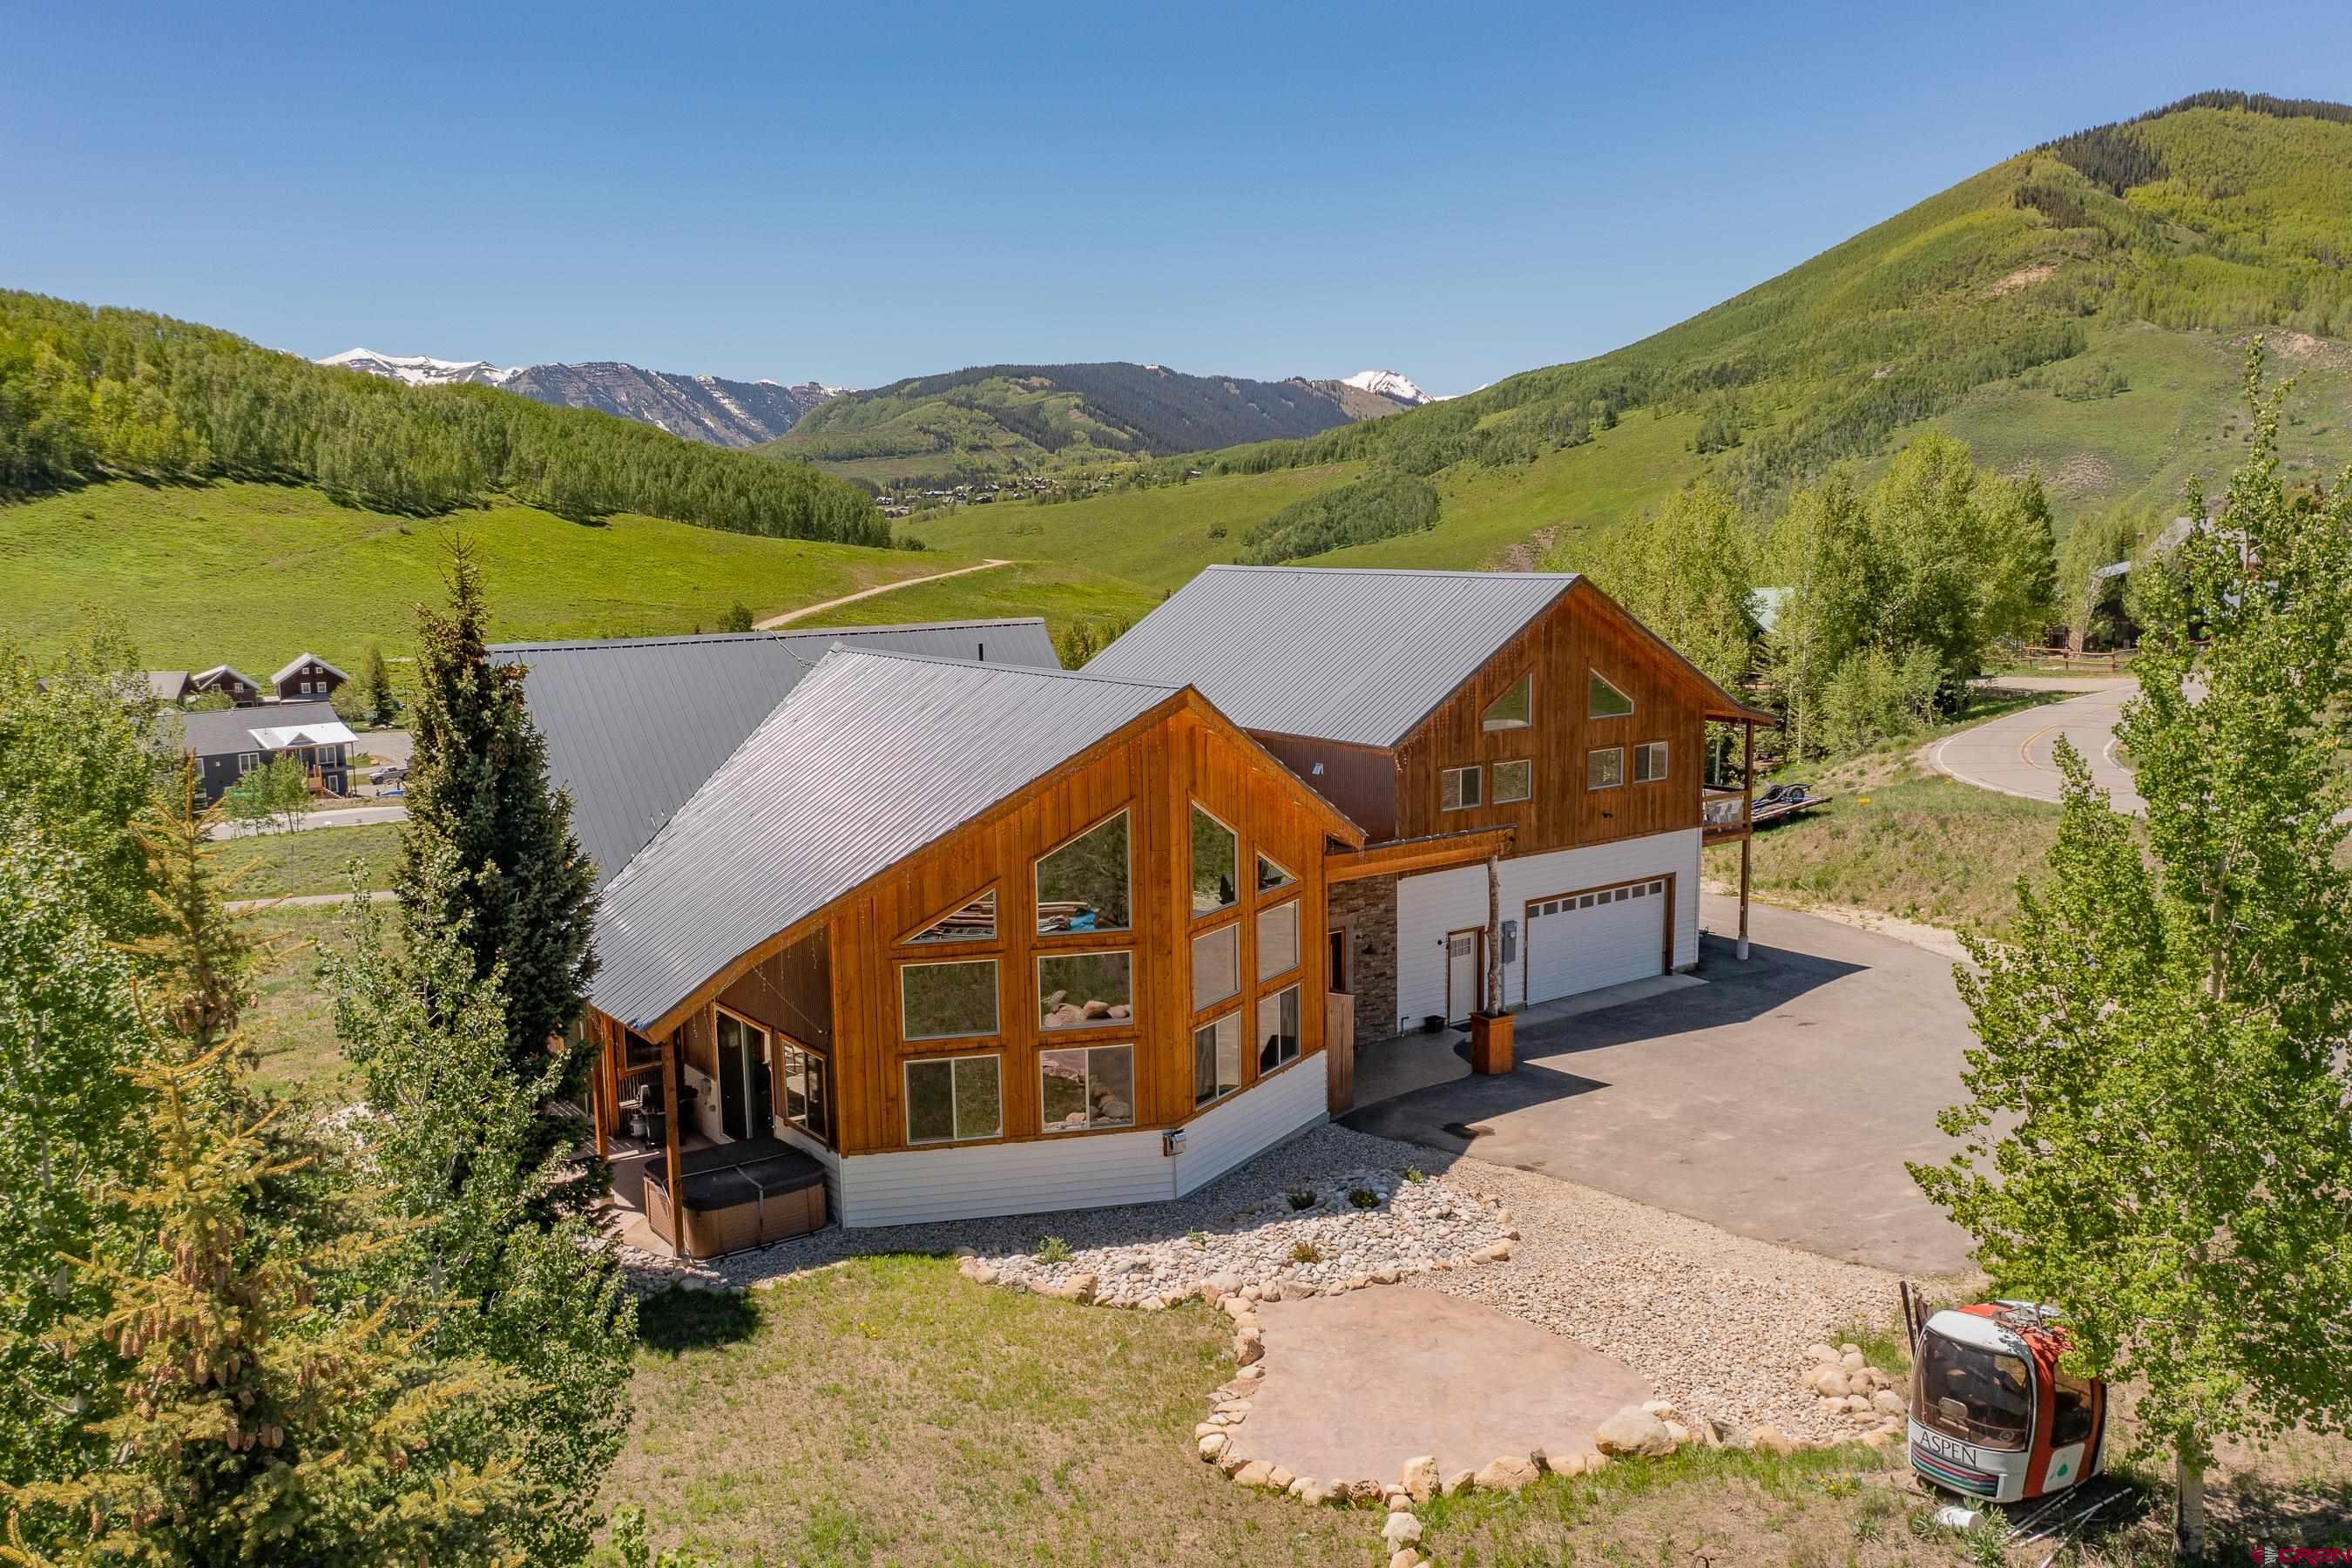 13 Belleview Drive, Mt. Crested Butte, CO 81225